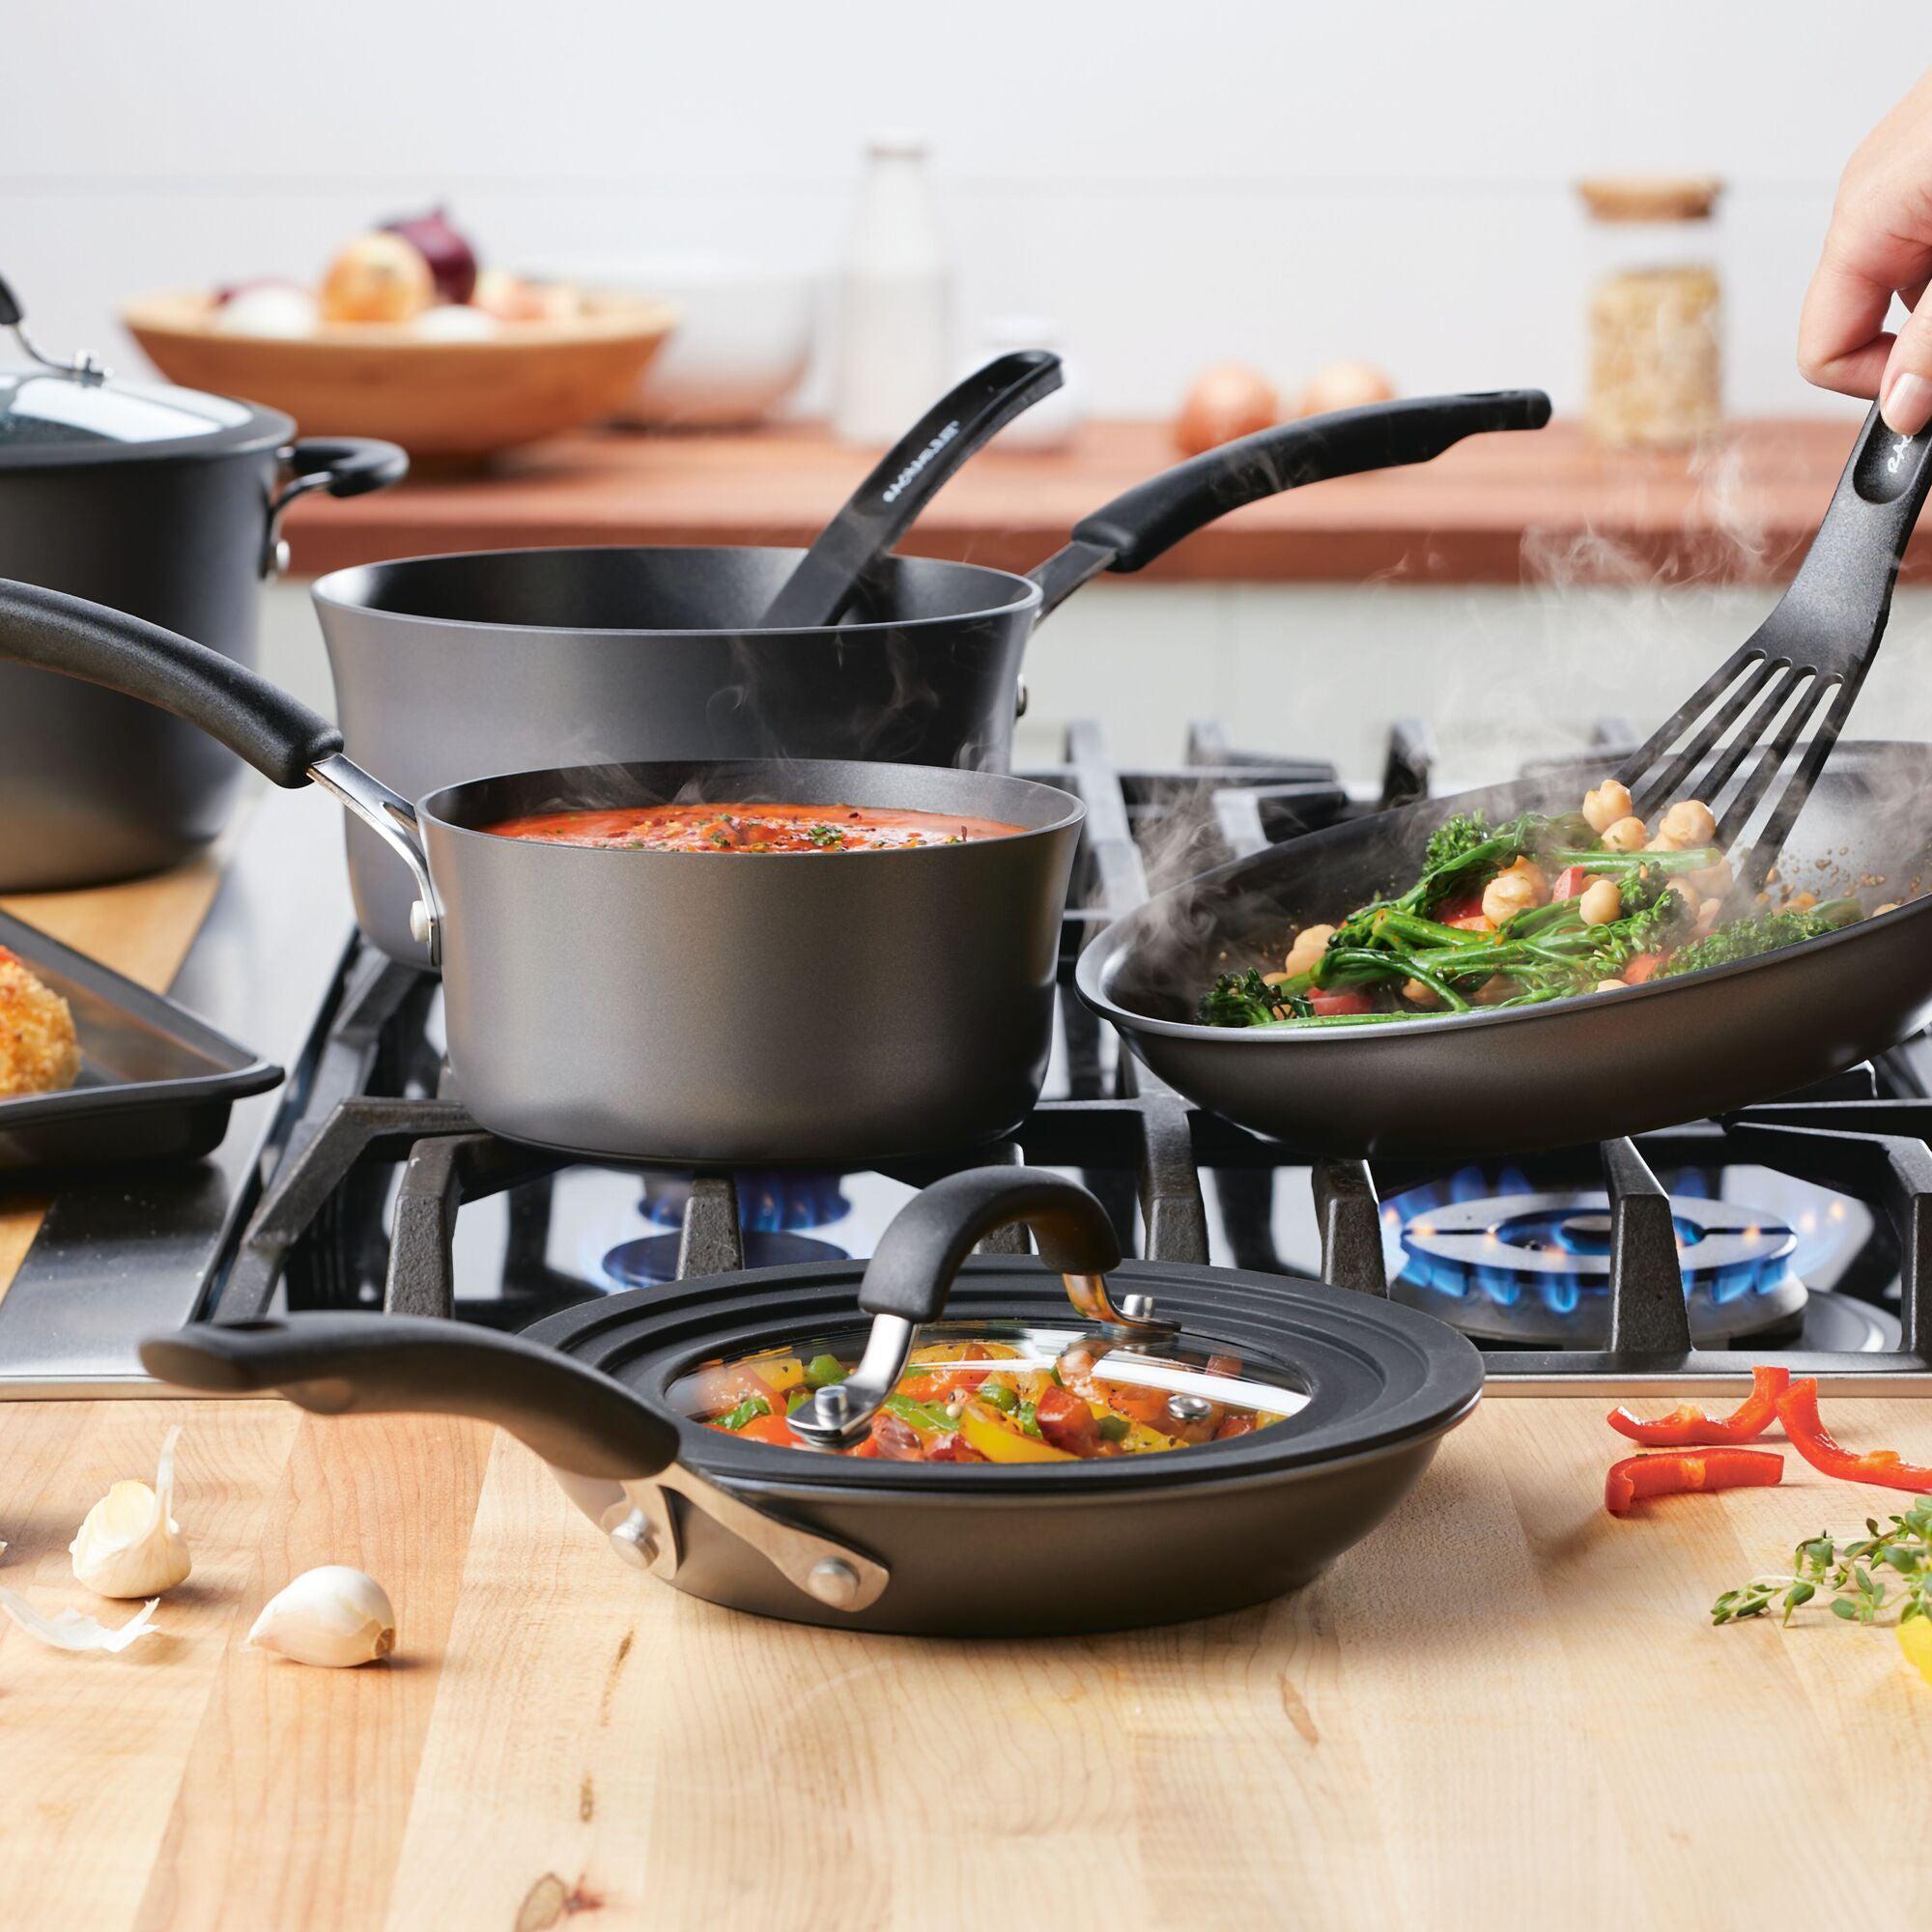 Cook + Create Hard Anodized Nonstick Cookware Sets 10-Piece